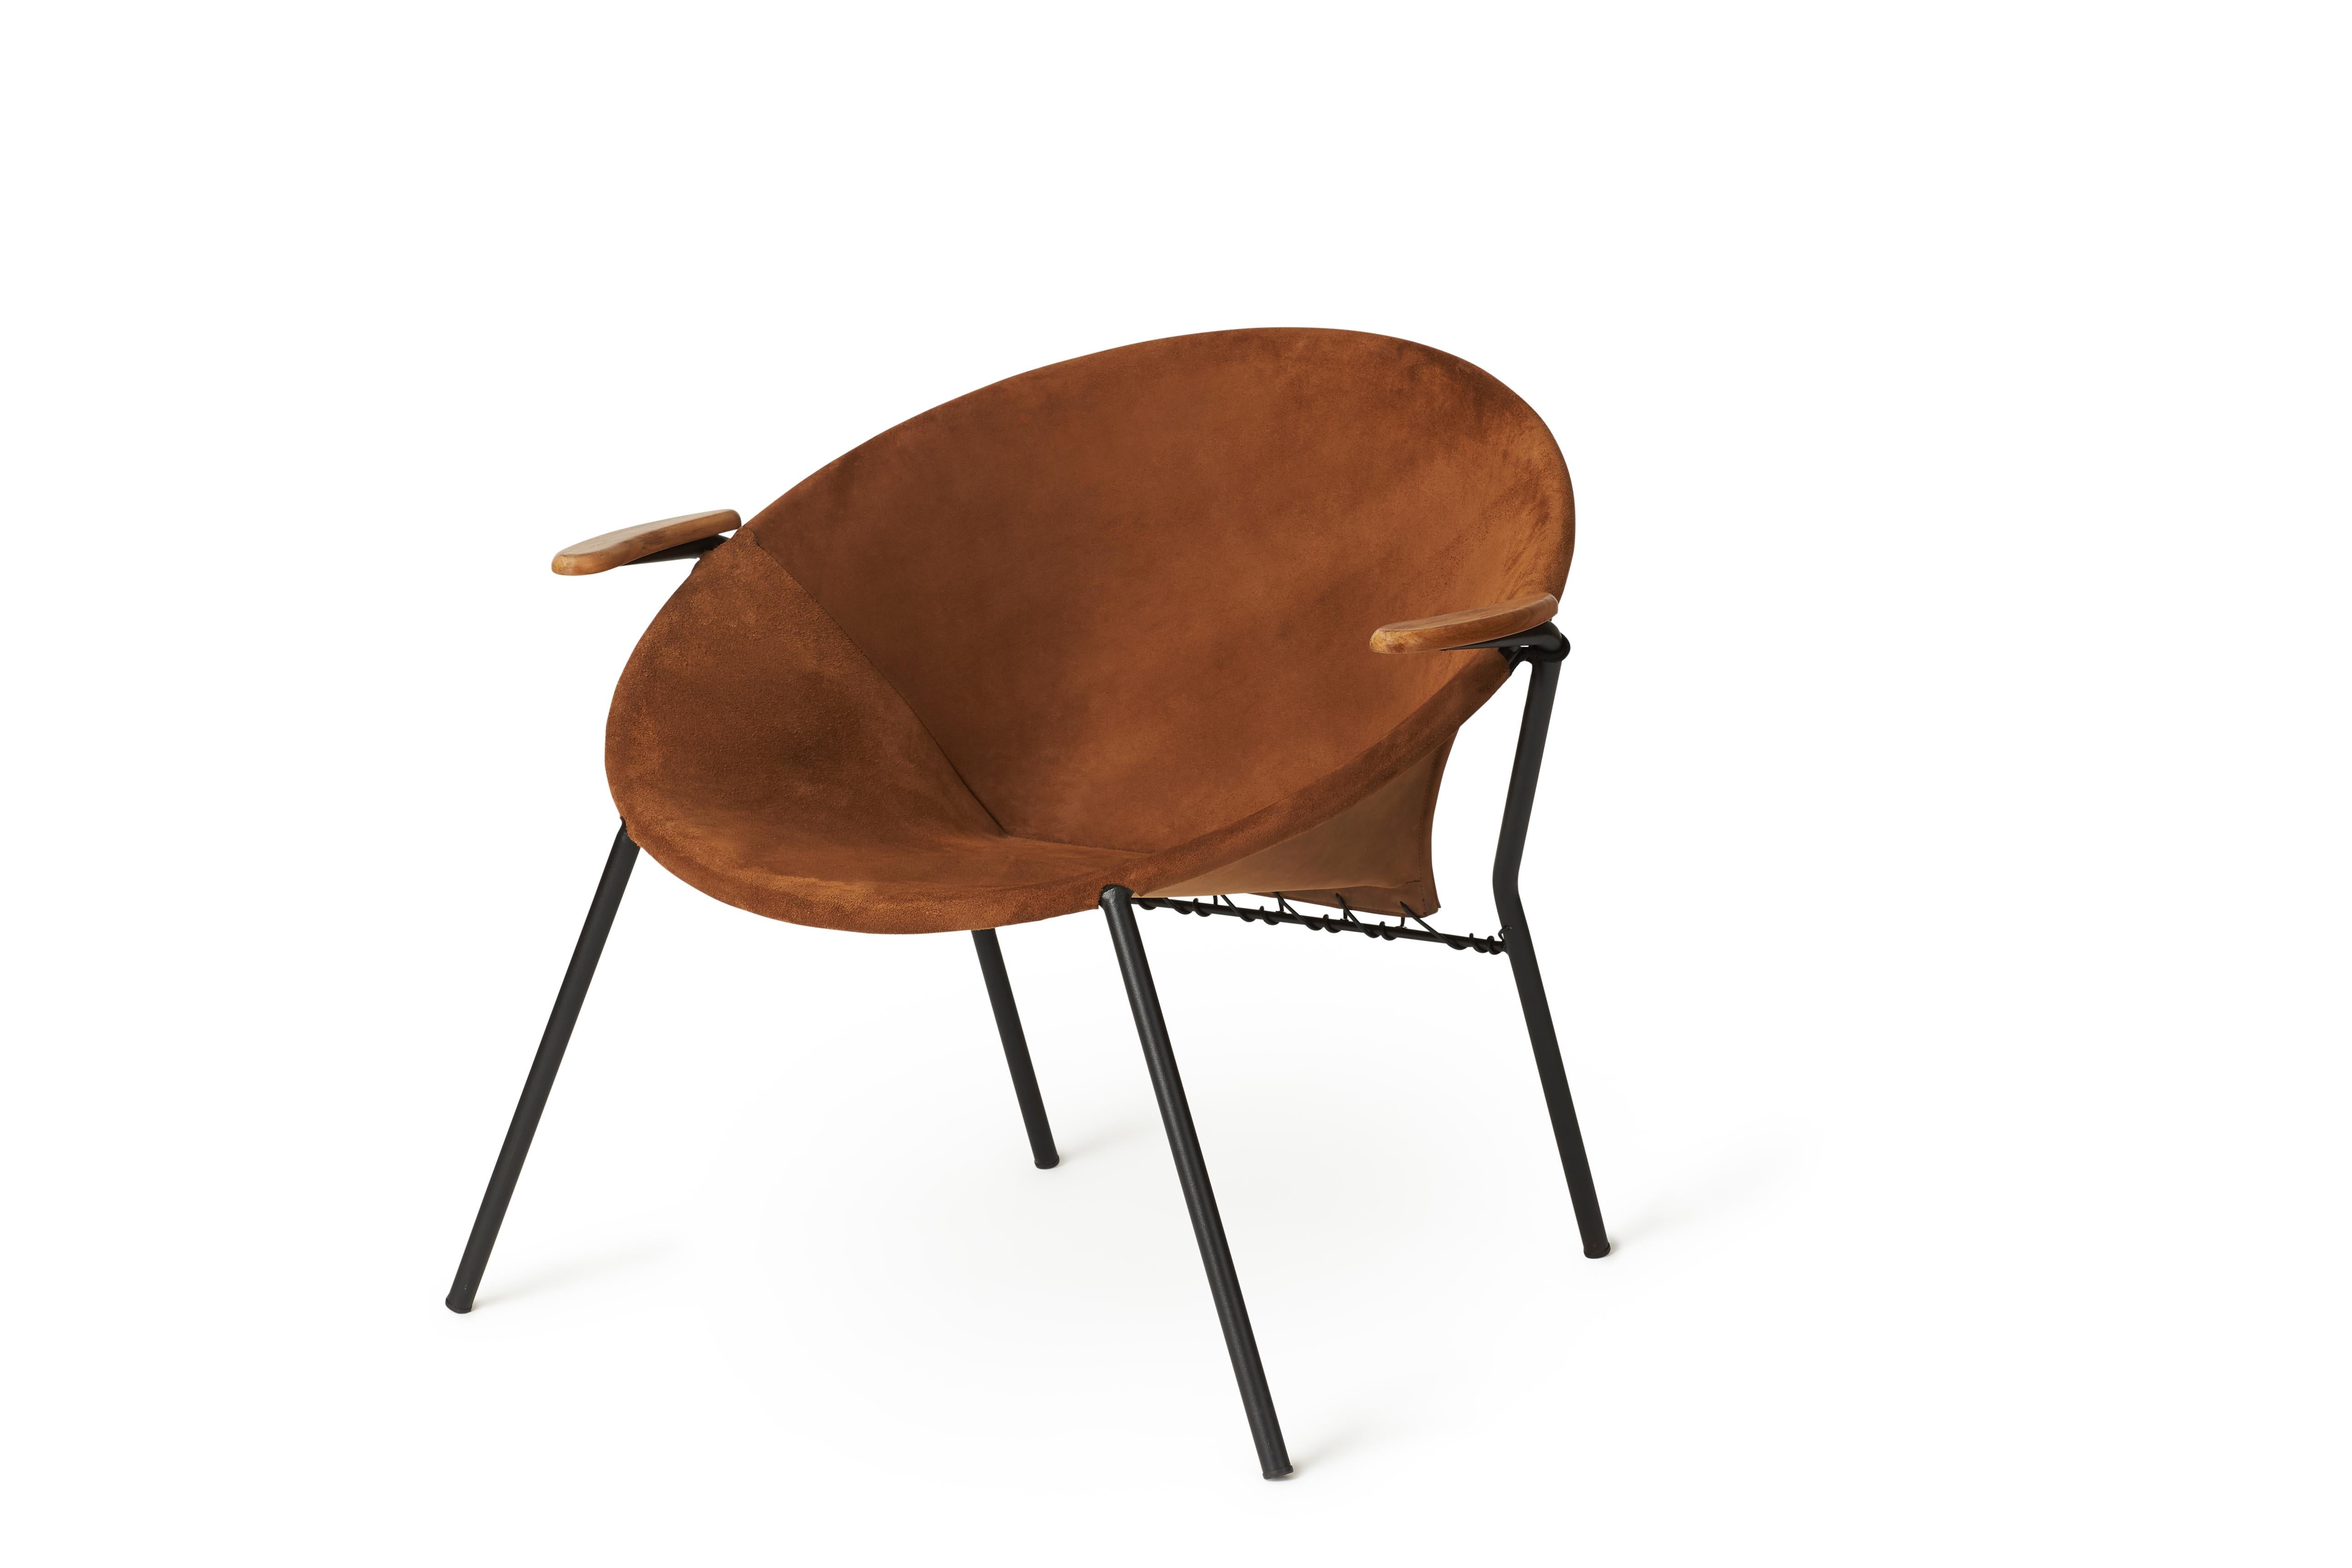 The iconic balloon lounge chair with its industrial look was the work of the highly acclaimed Danish architect, Hans Olsen, who designed the chair in the 1950s. The design of the lounge chair is raw, playful and embracing, appealing to the senses